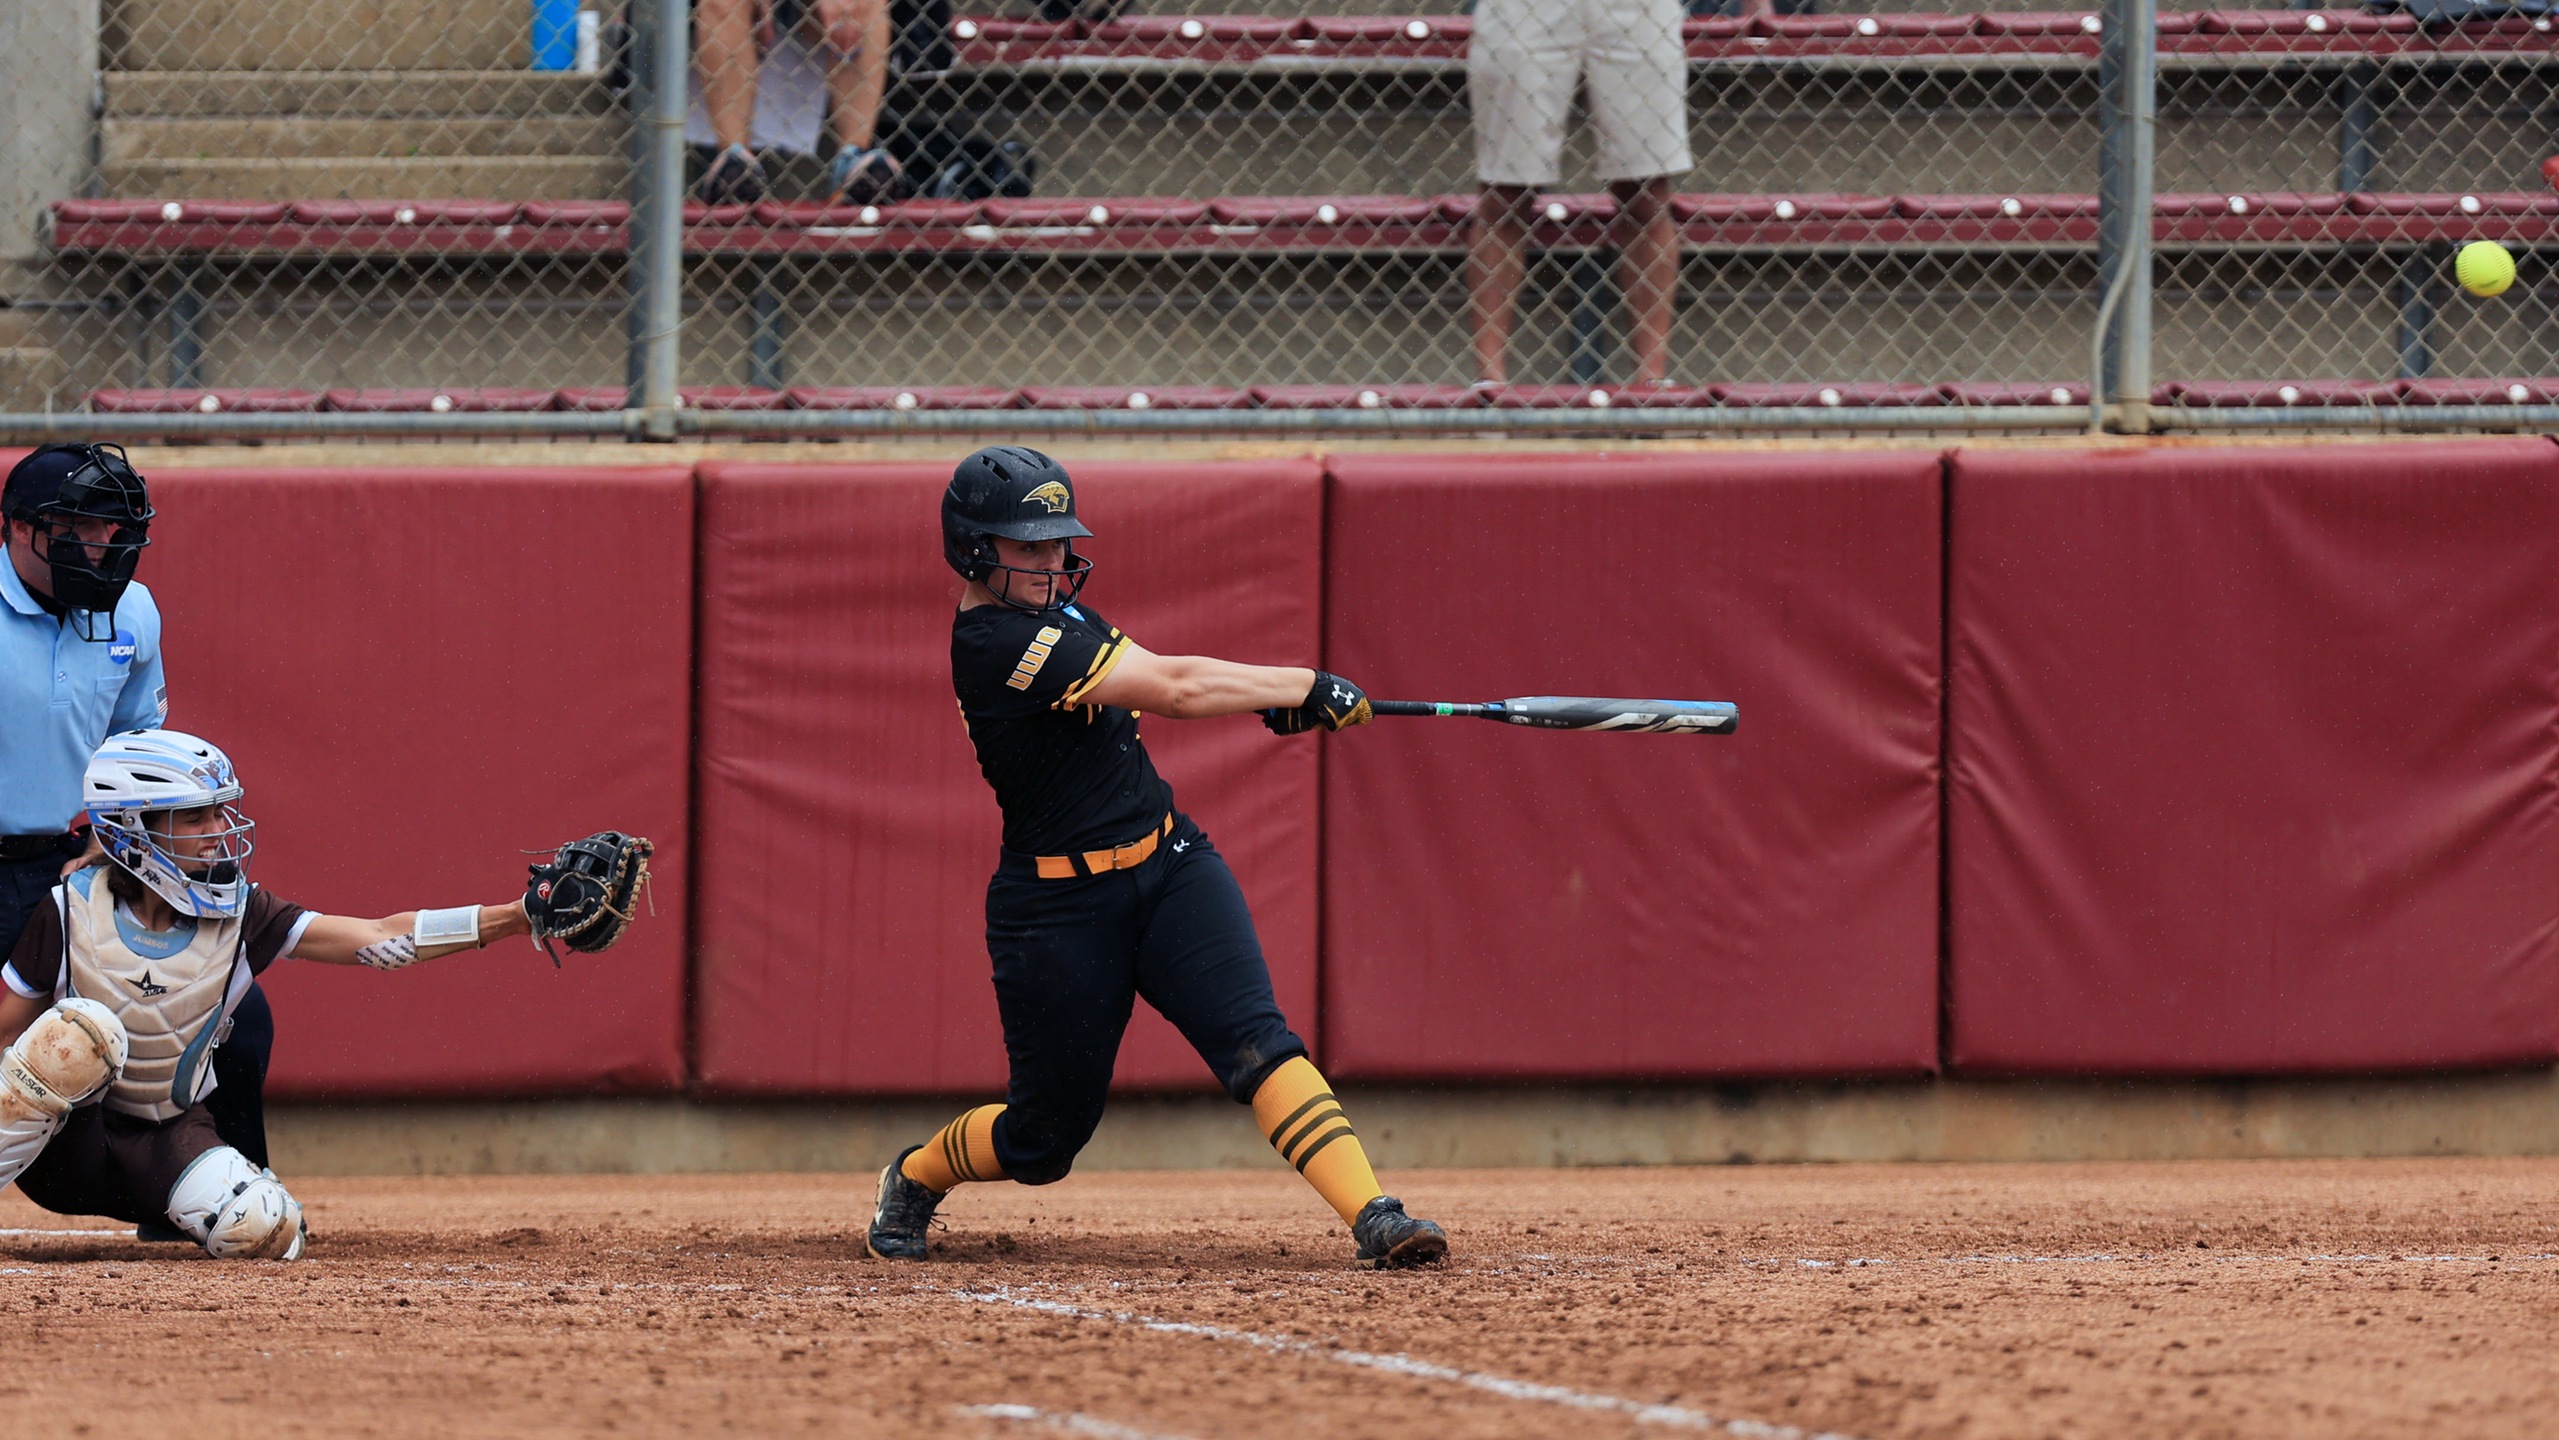 Amanda Mc Ilhany had two of the Titans' nine hits against the Jumbos, including a first-inning run-scoring single.